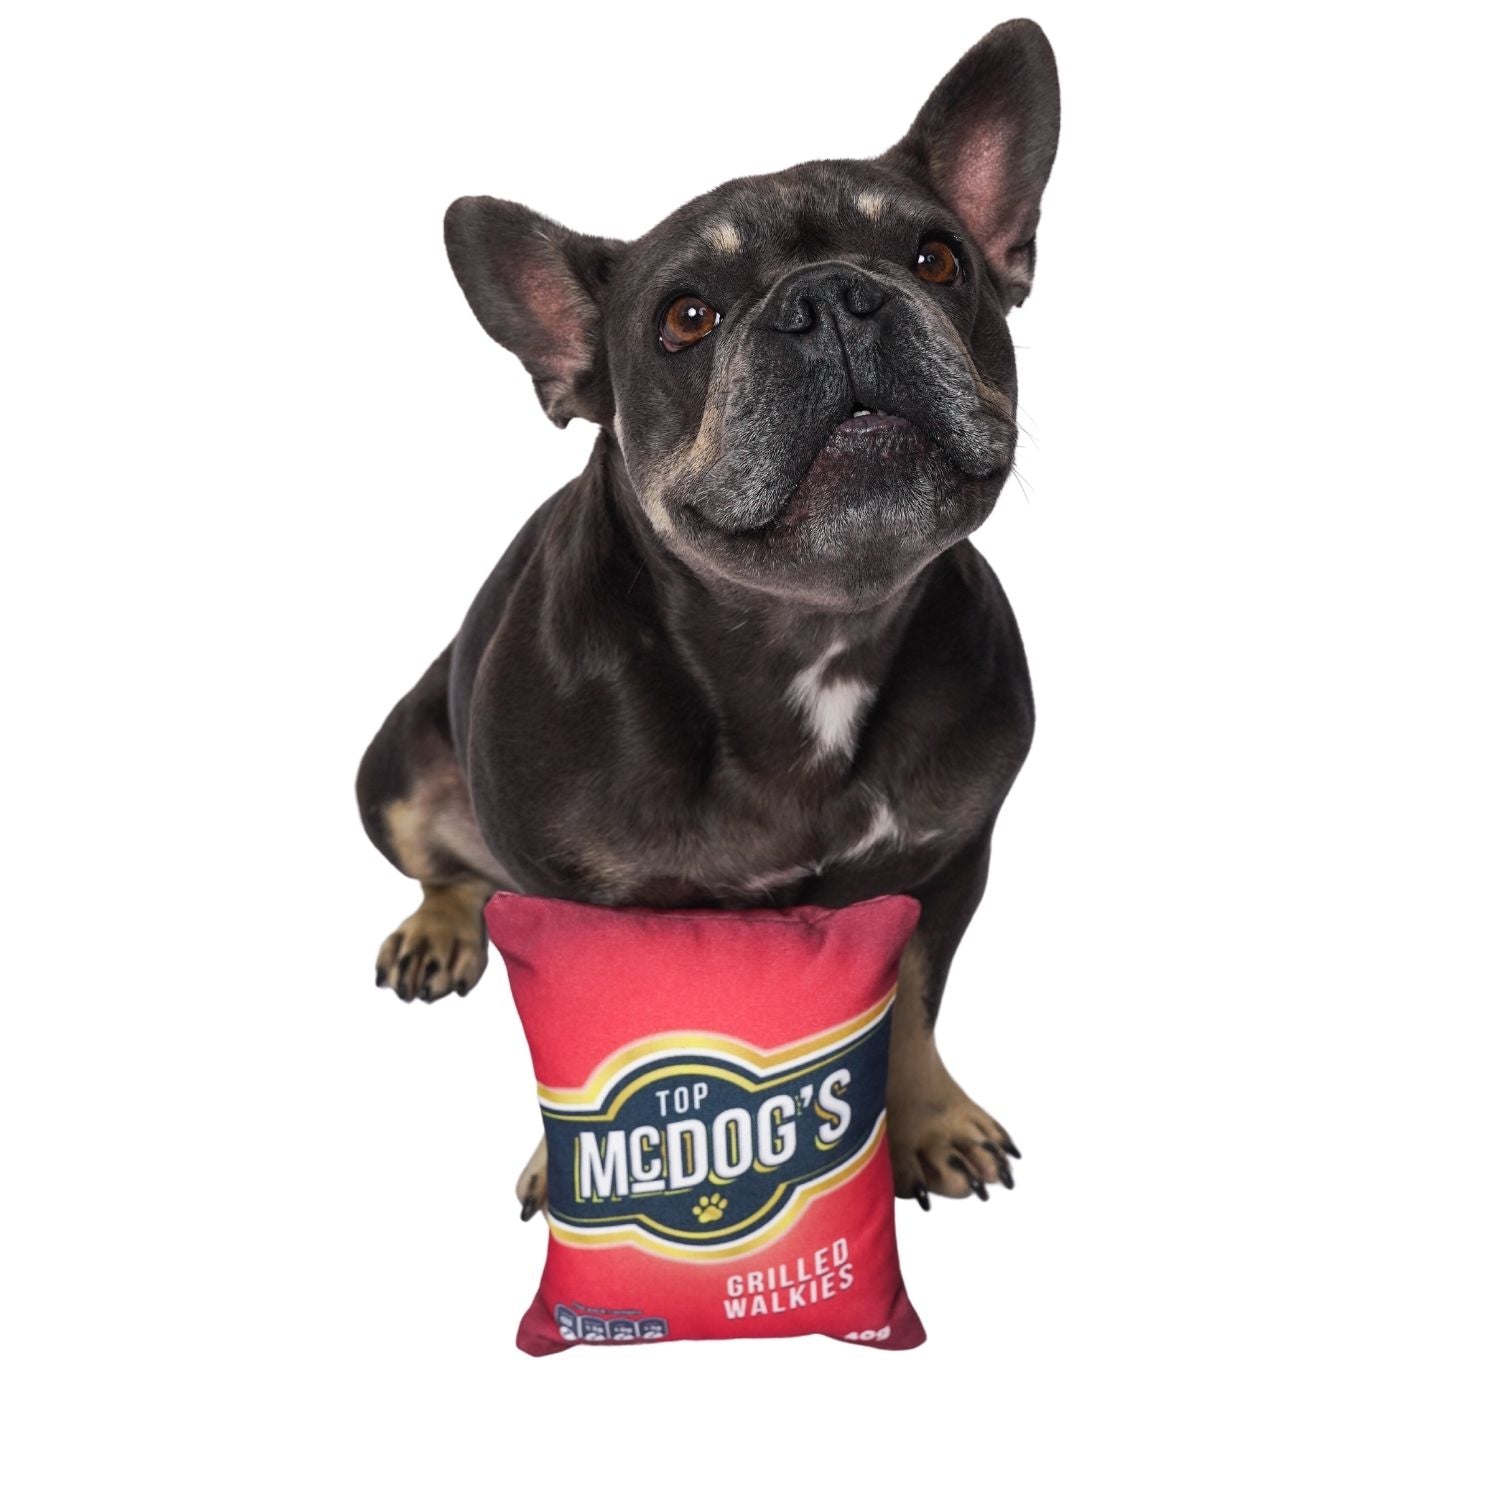 mcdogs-dog-toy-red